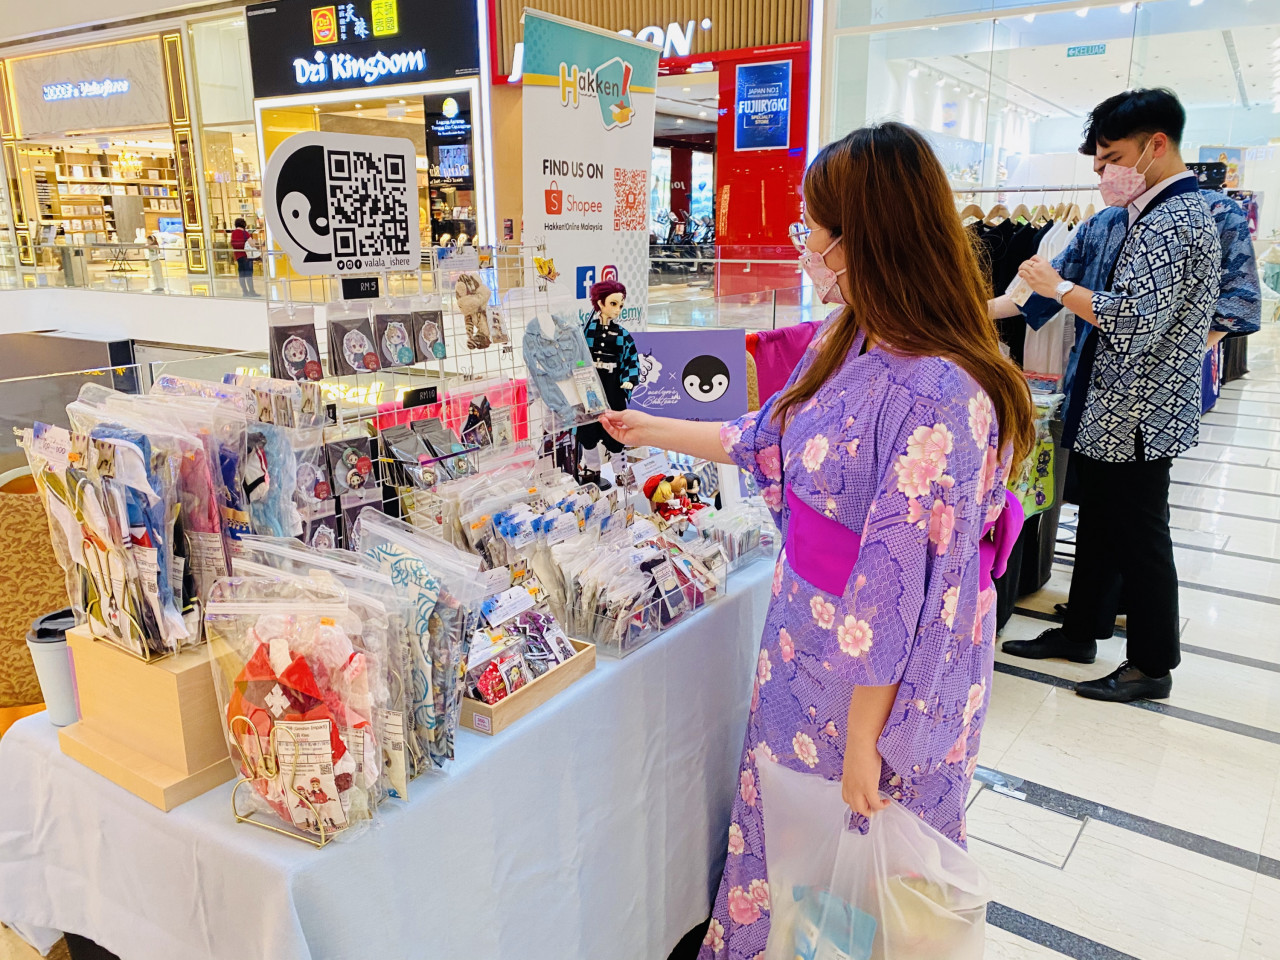 The AniManGaki marketplace offers shoppers the chance to purchase limited edition figurines, handmade crafts, Ichiban Kuji and Gachapon. – Pic courtesy of Tokyo Street, Pavilion KL